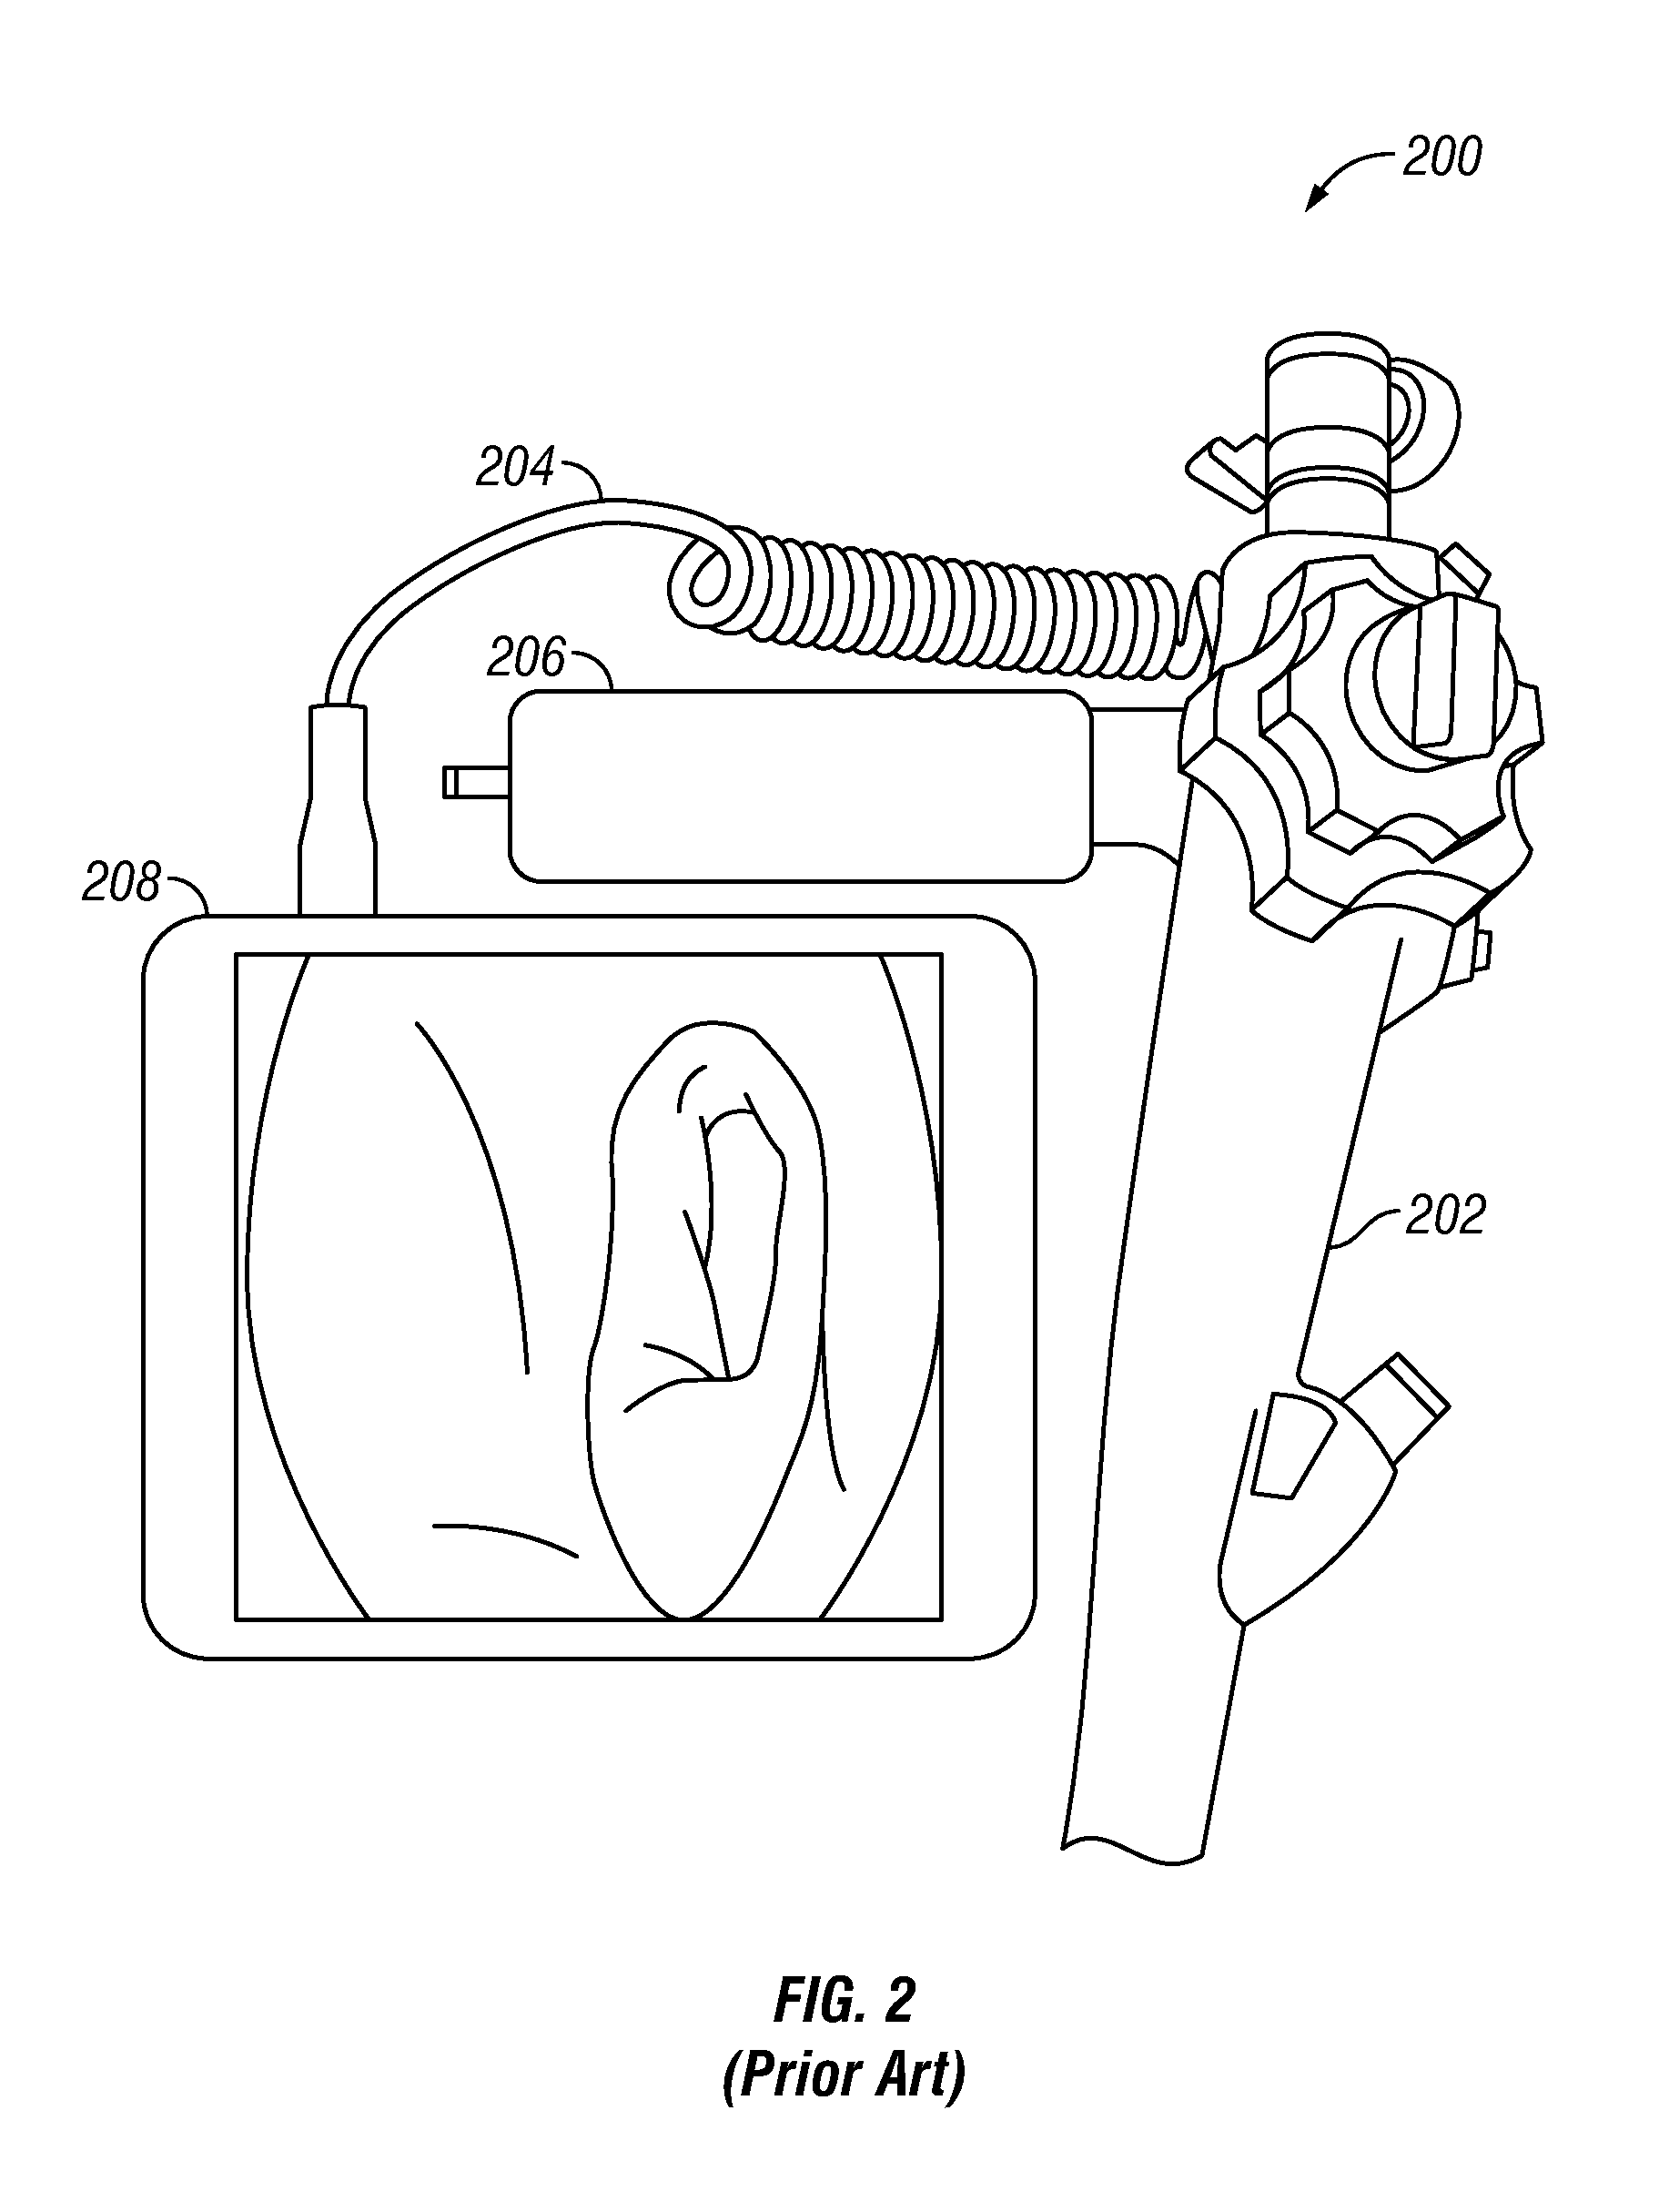 System and Method for Wirelessly Transmitting Operational Data From an Endoscope to a Remote Device